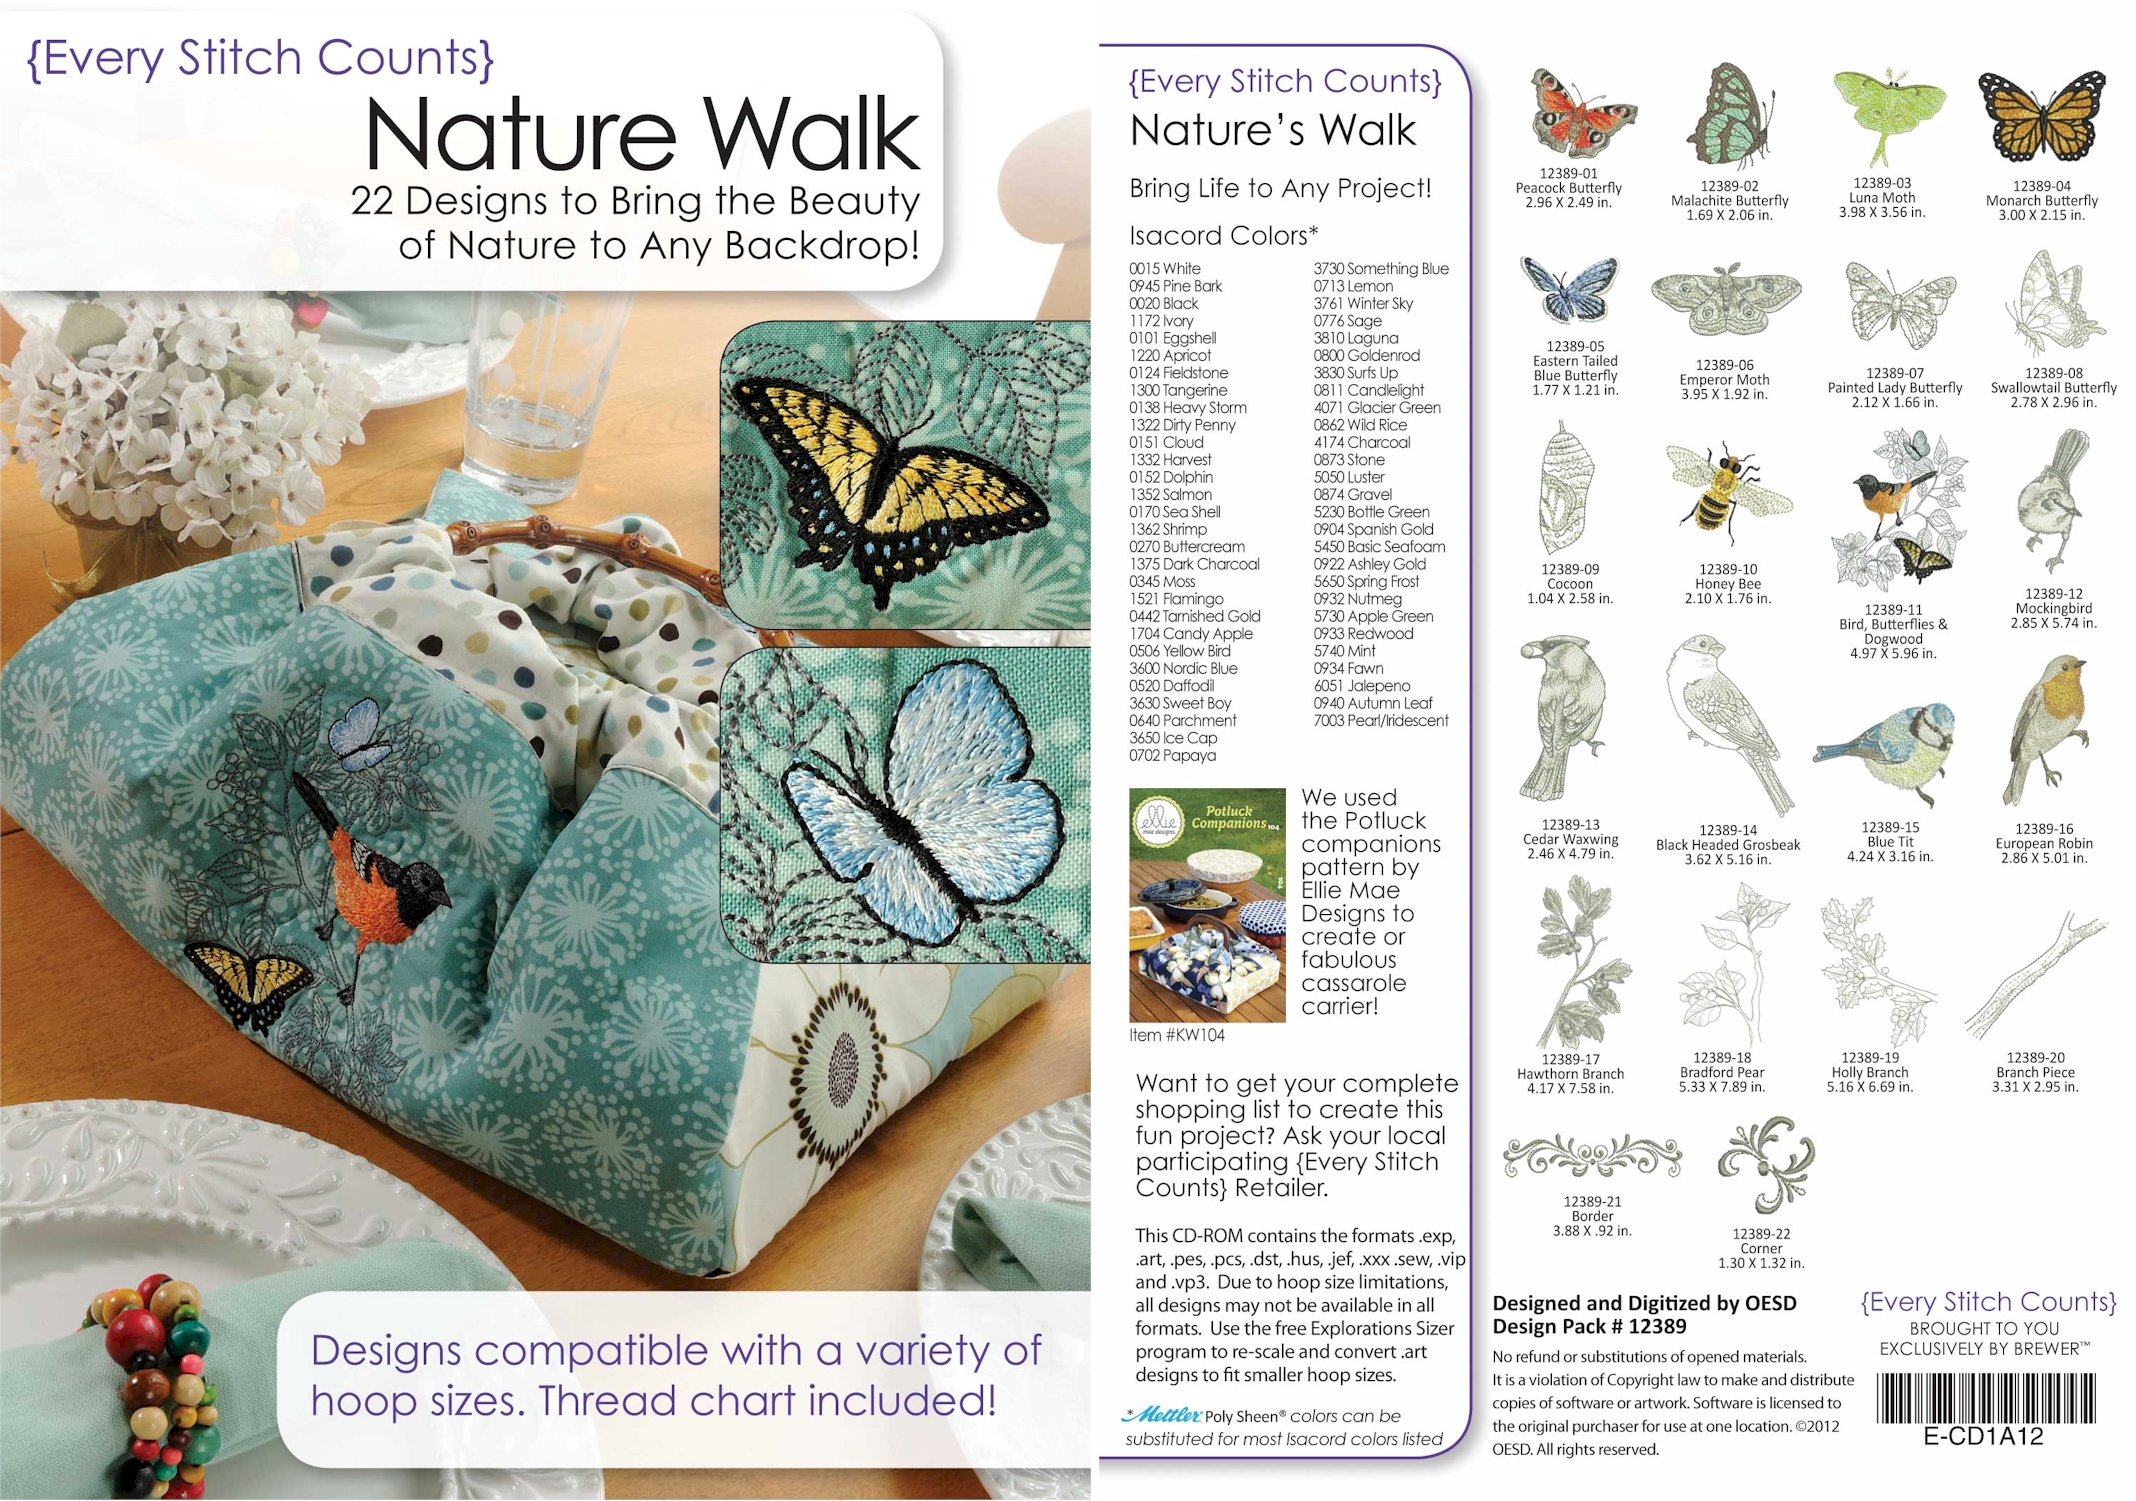 Nature Walk Embroidery Designs on CD-ROM by Every Stitch Counts